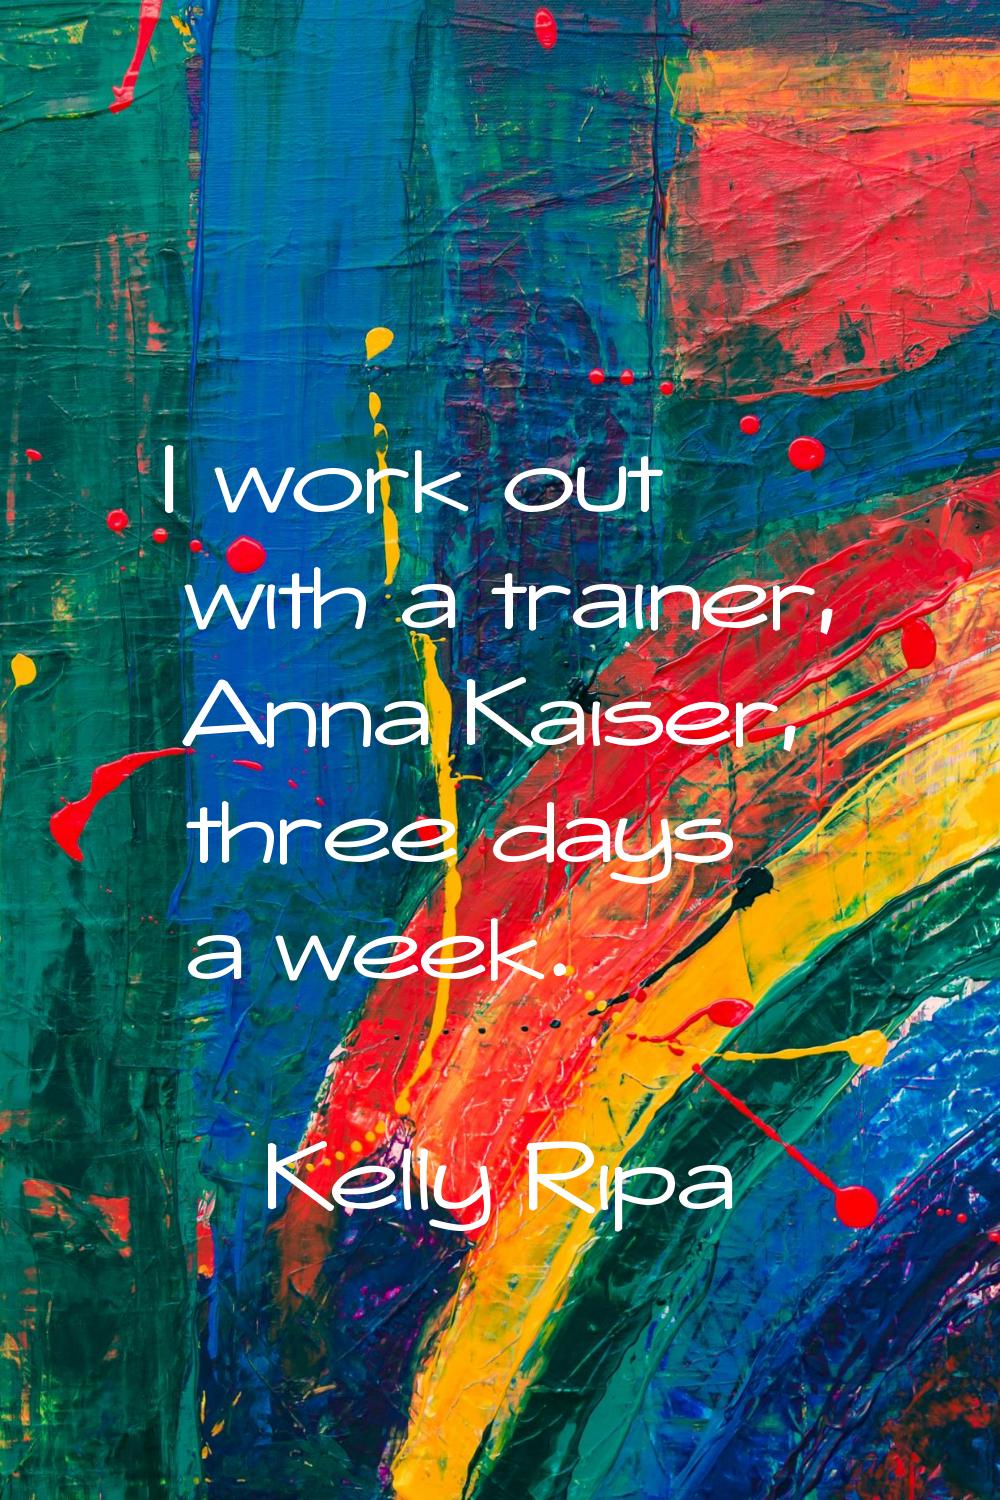 I work out with a trainer, Anna Kaiser, three days a week.